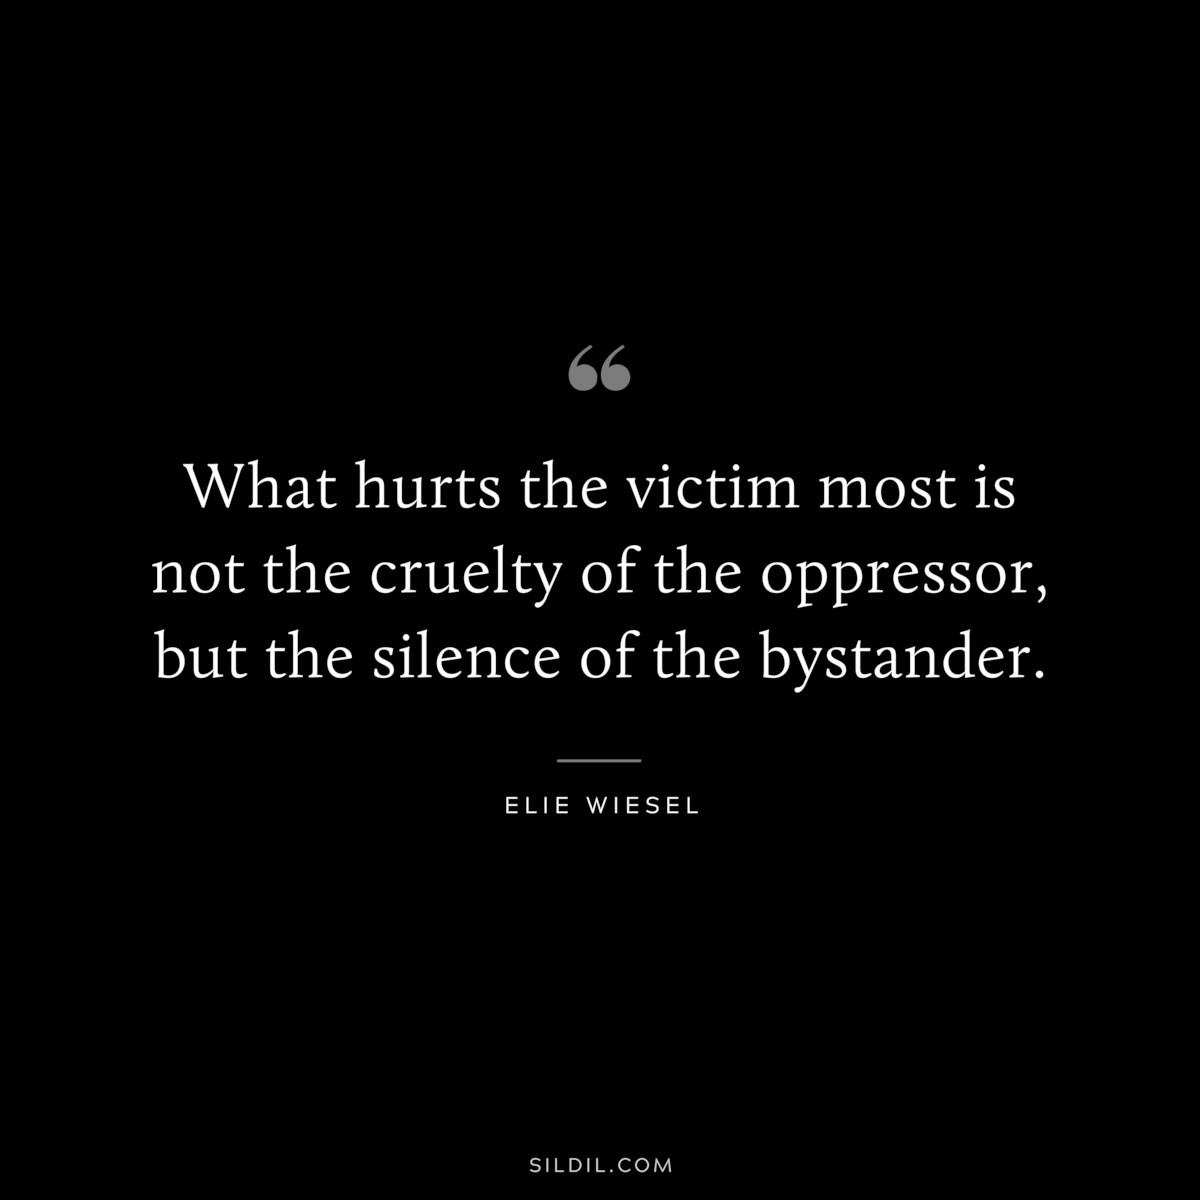 What hurts the victim most is not the cruelty of the oppressor, but the silence of the bystander. ― Elie Wiesel